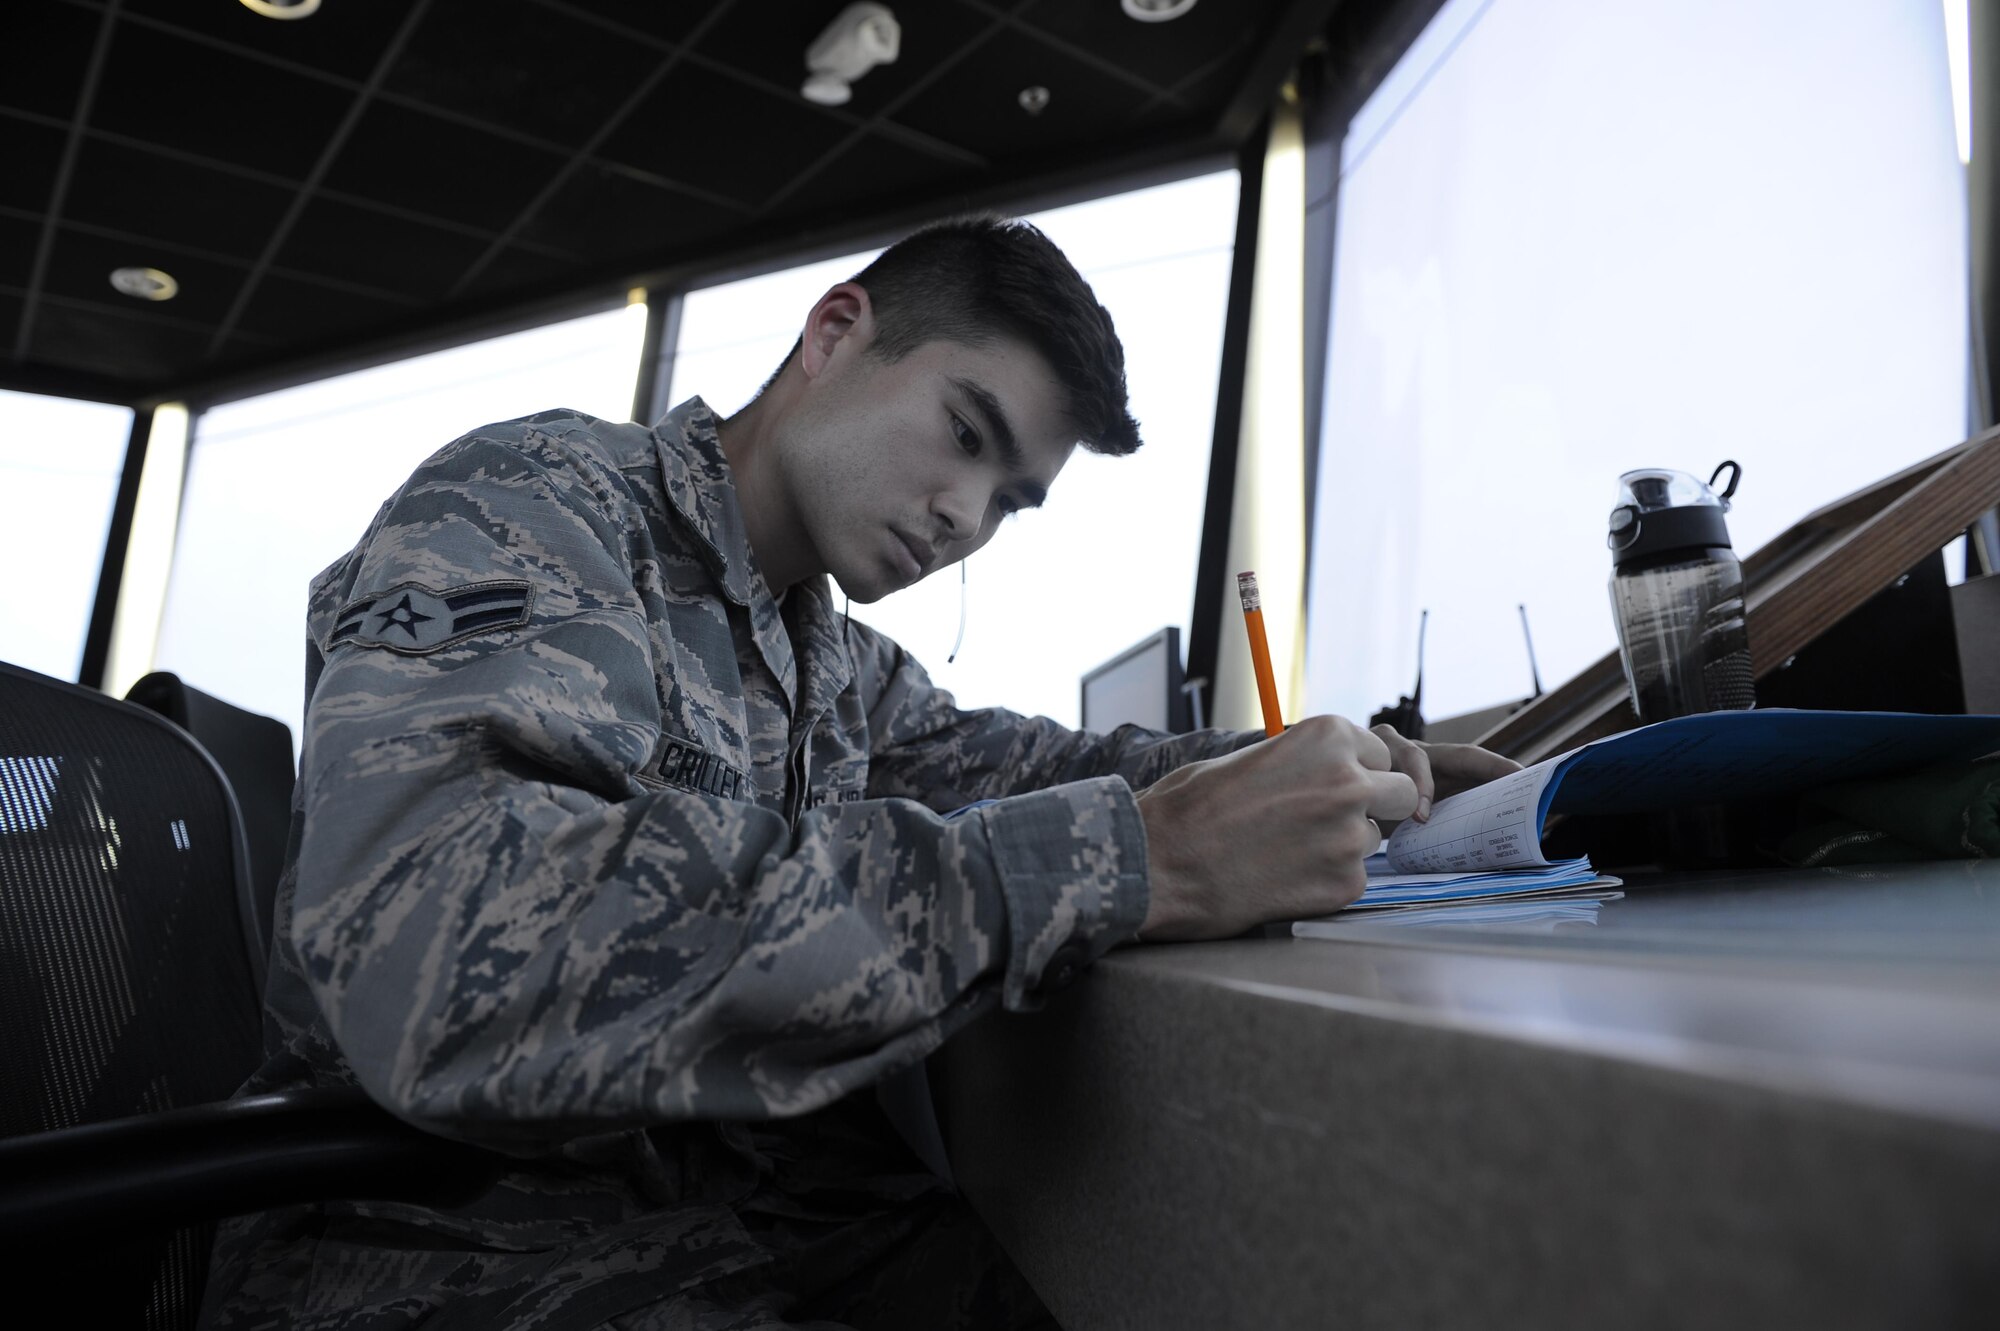 Airman 1st Class Kevin Crilley, an air traffic control apprentice with the 1st Special Operations Support Squadron, reviews his training record at Hurlburt Field, Fla., May 3, 2017. Air traffic controllers provide safe and organized flow of aircraft on the flight line and in the air by monitoring and keeping track of scheduled incoming and departing aircraft. (U.S. Air Force photo by Airman 1st Class Isaac O. Guest IV)